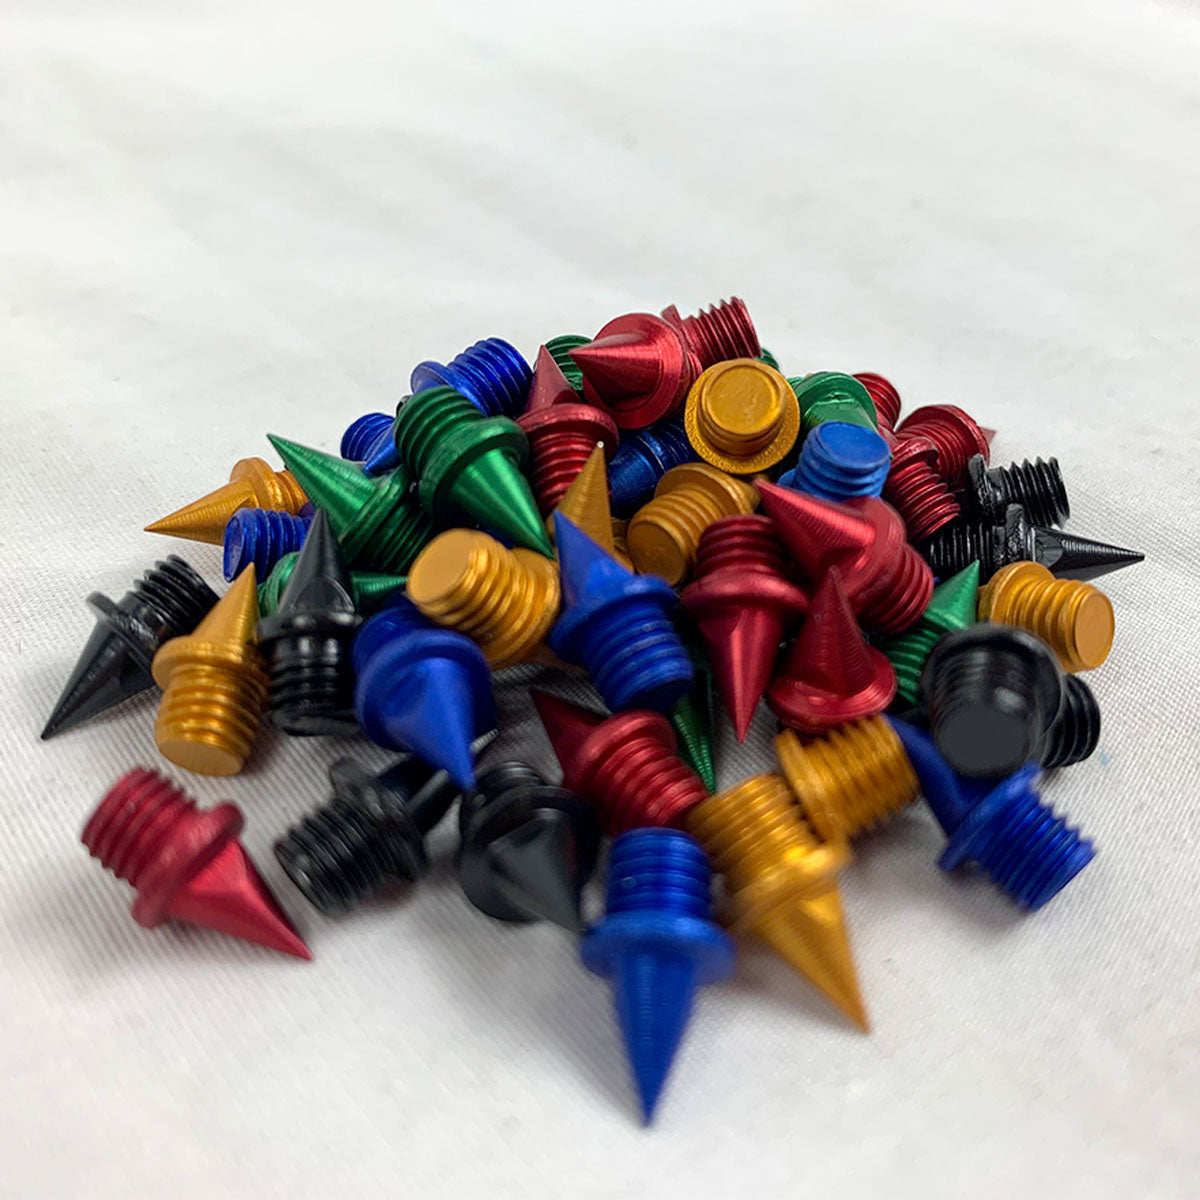 COLORED CARBON PYRAMID SPIKES